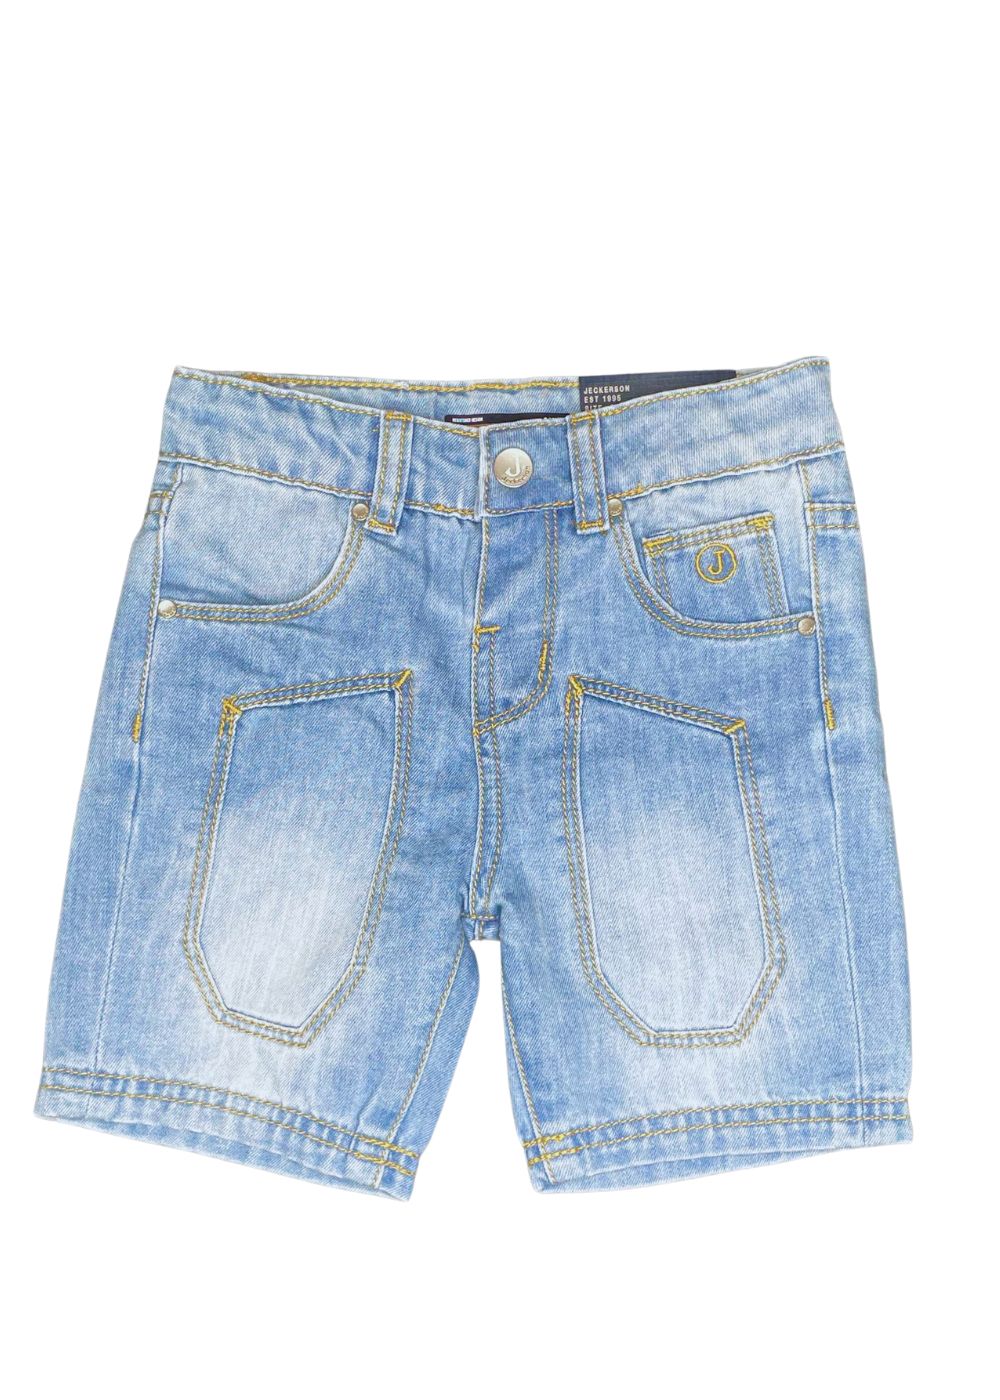 Featured image for “Jeckerson Shorts Jeans”